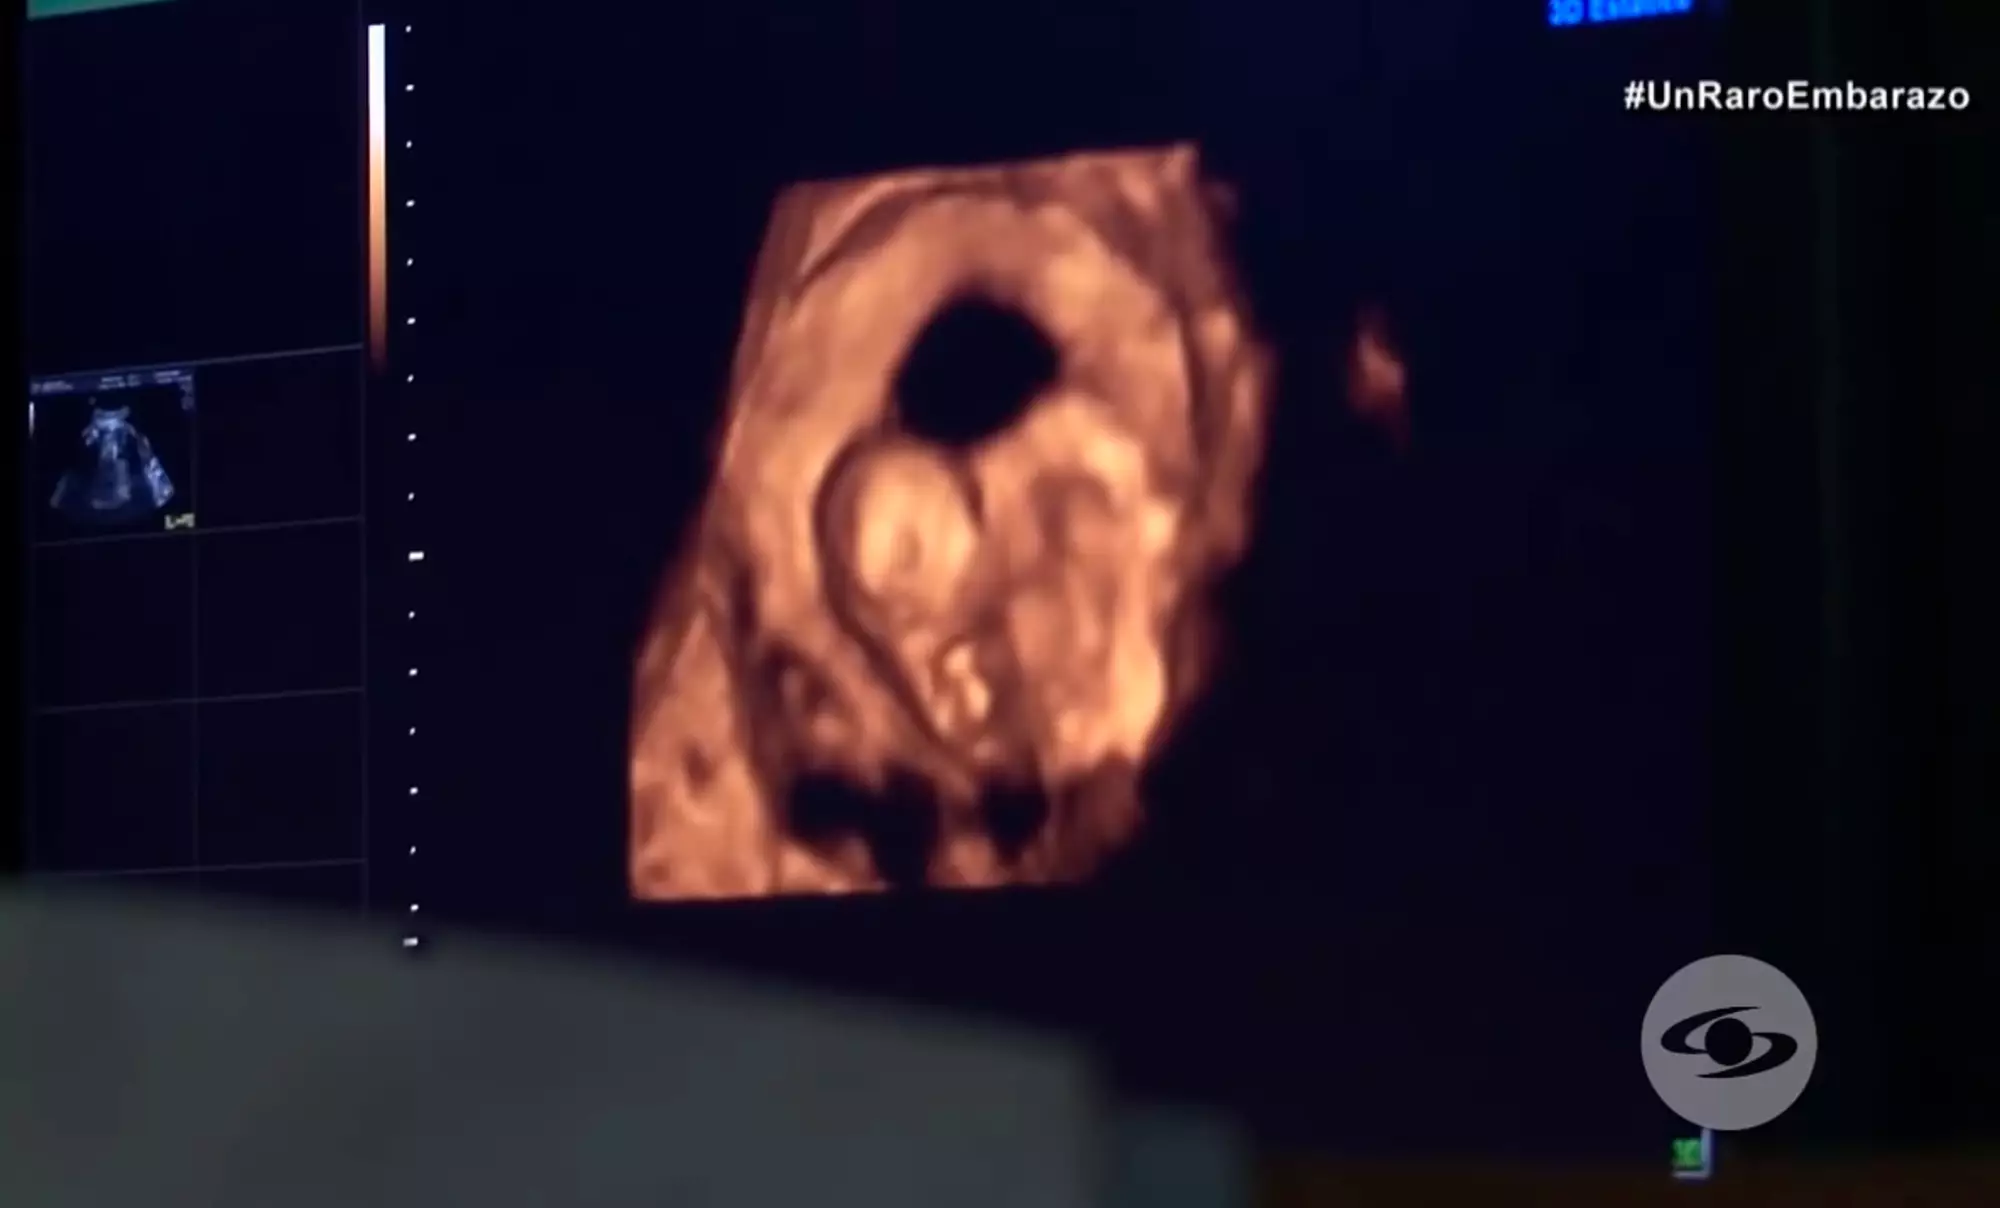 Doctors detected something in the baby's stomach during pregnancy.